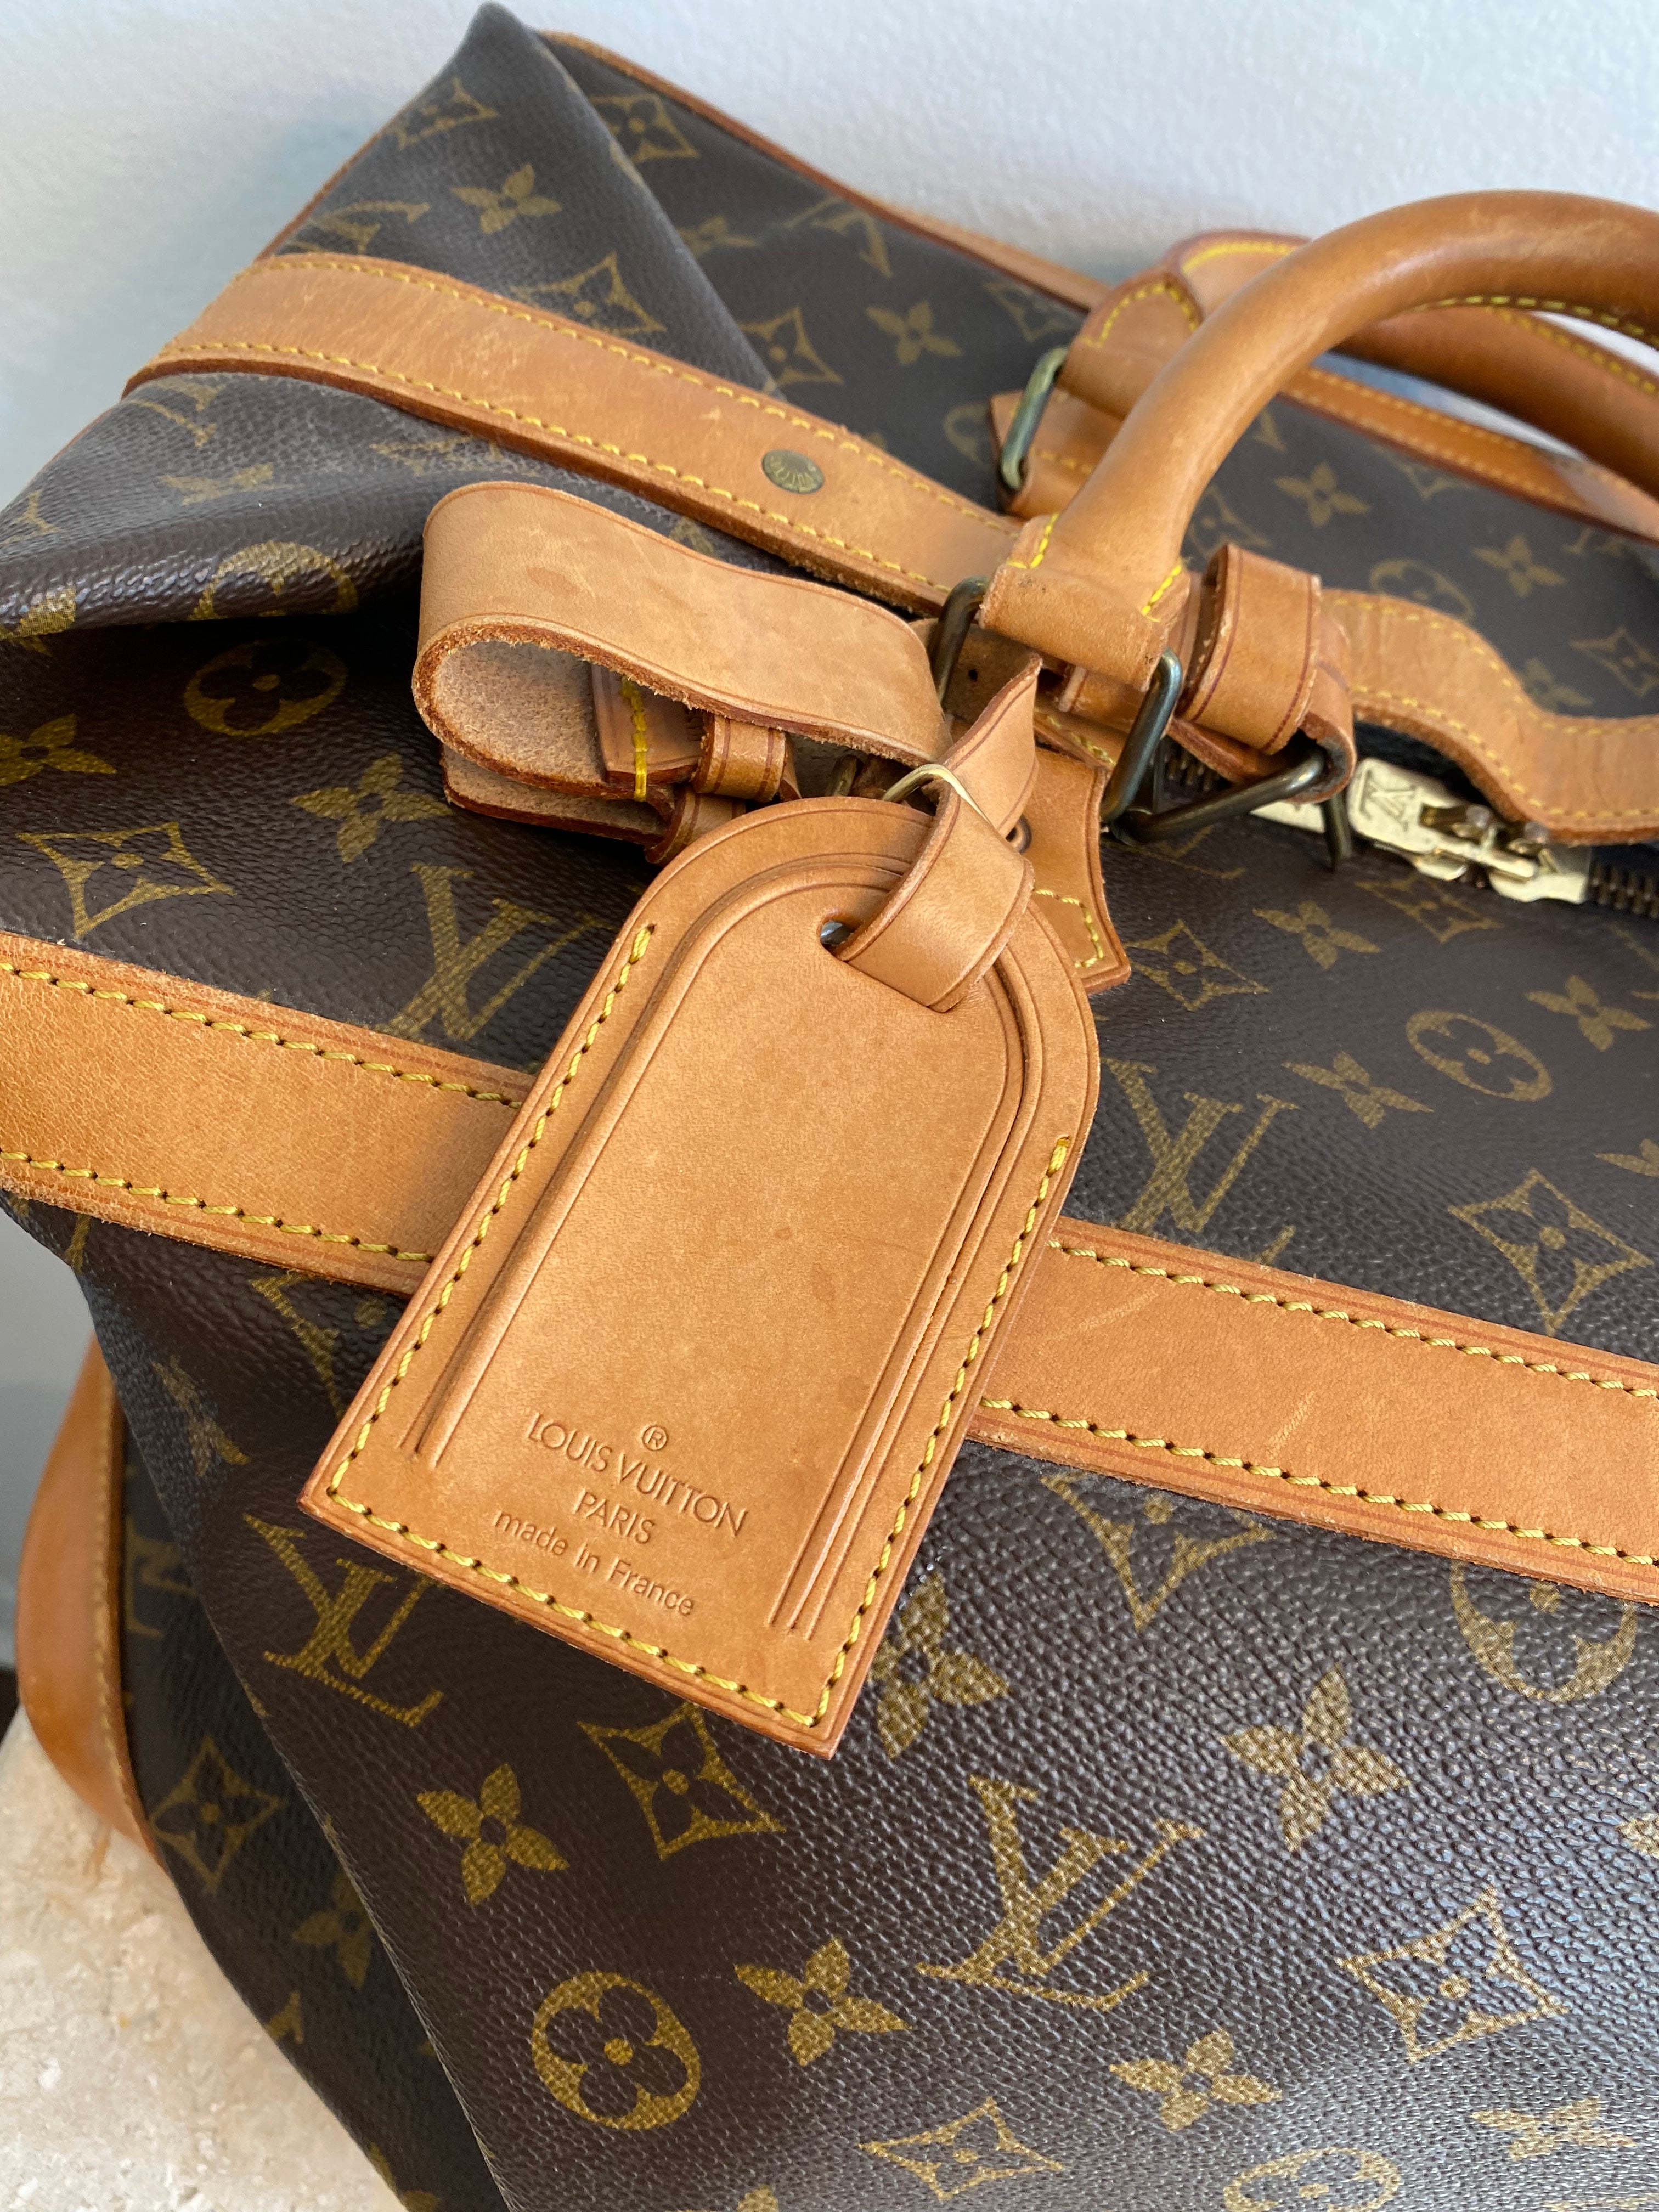 2nd Payment of Two Authentic LOUIS VUITTON Vintage Monogram